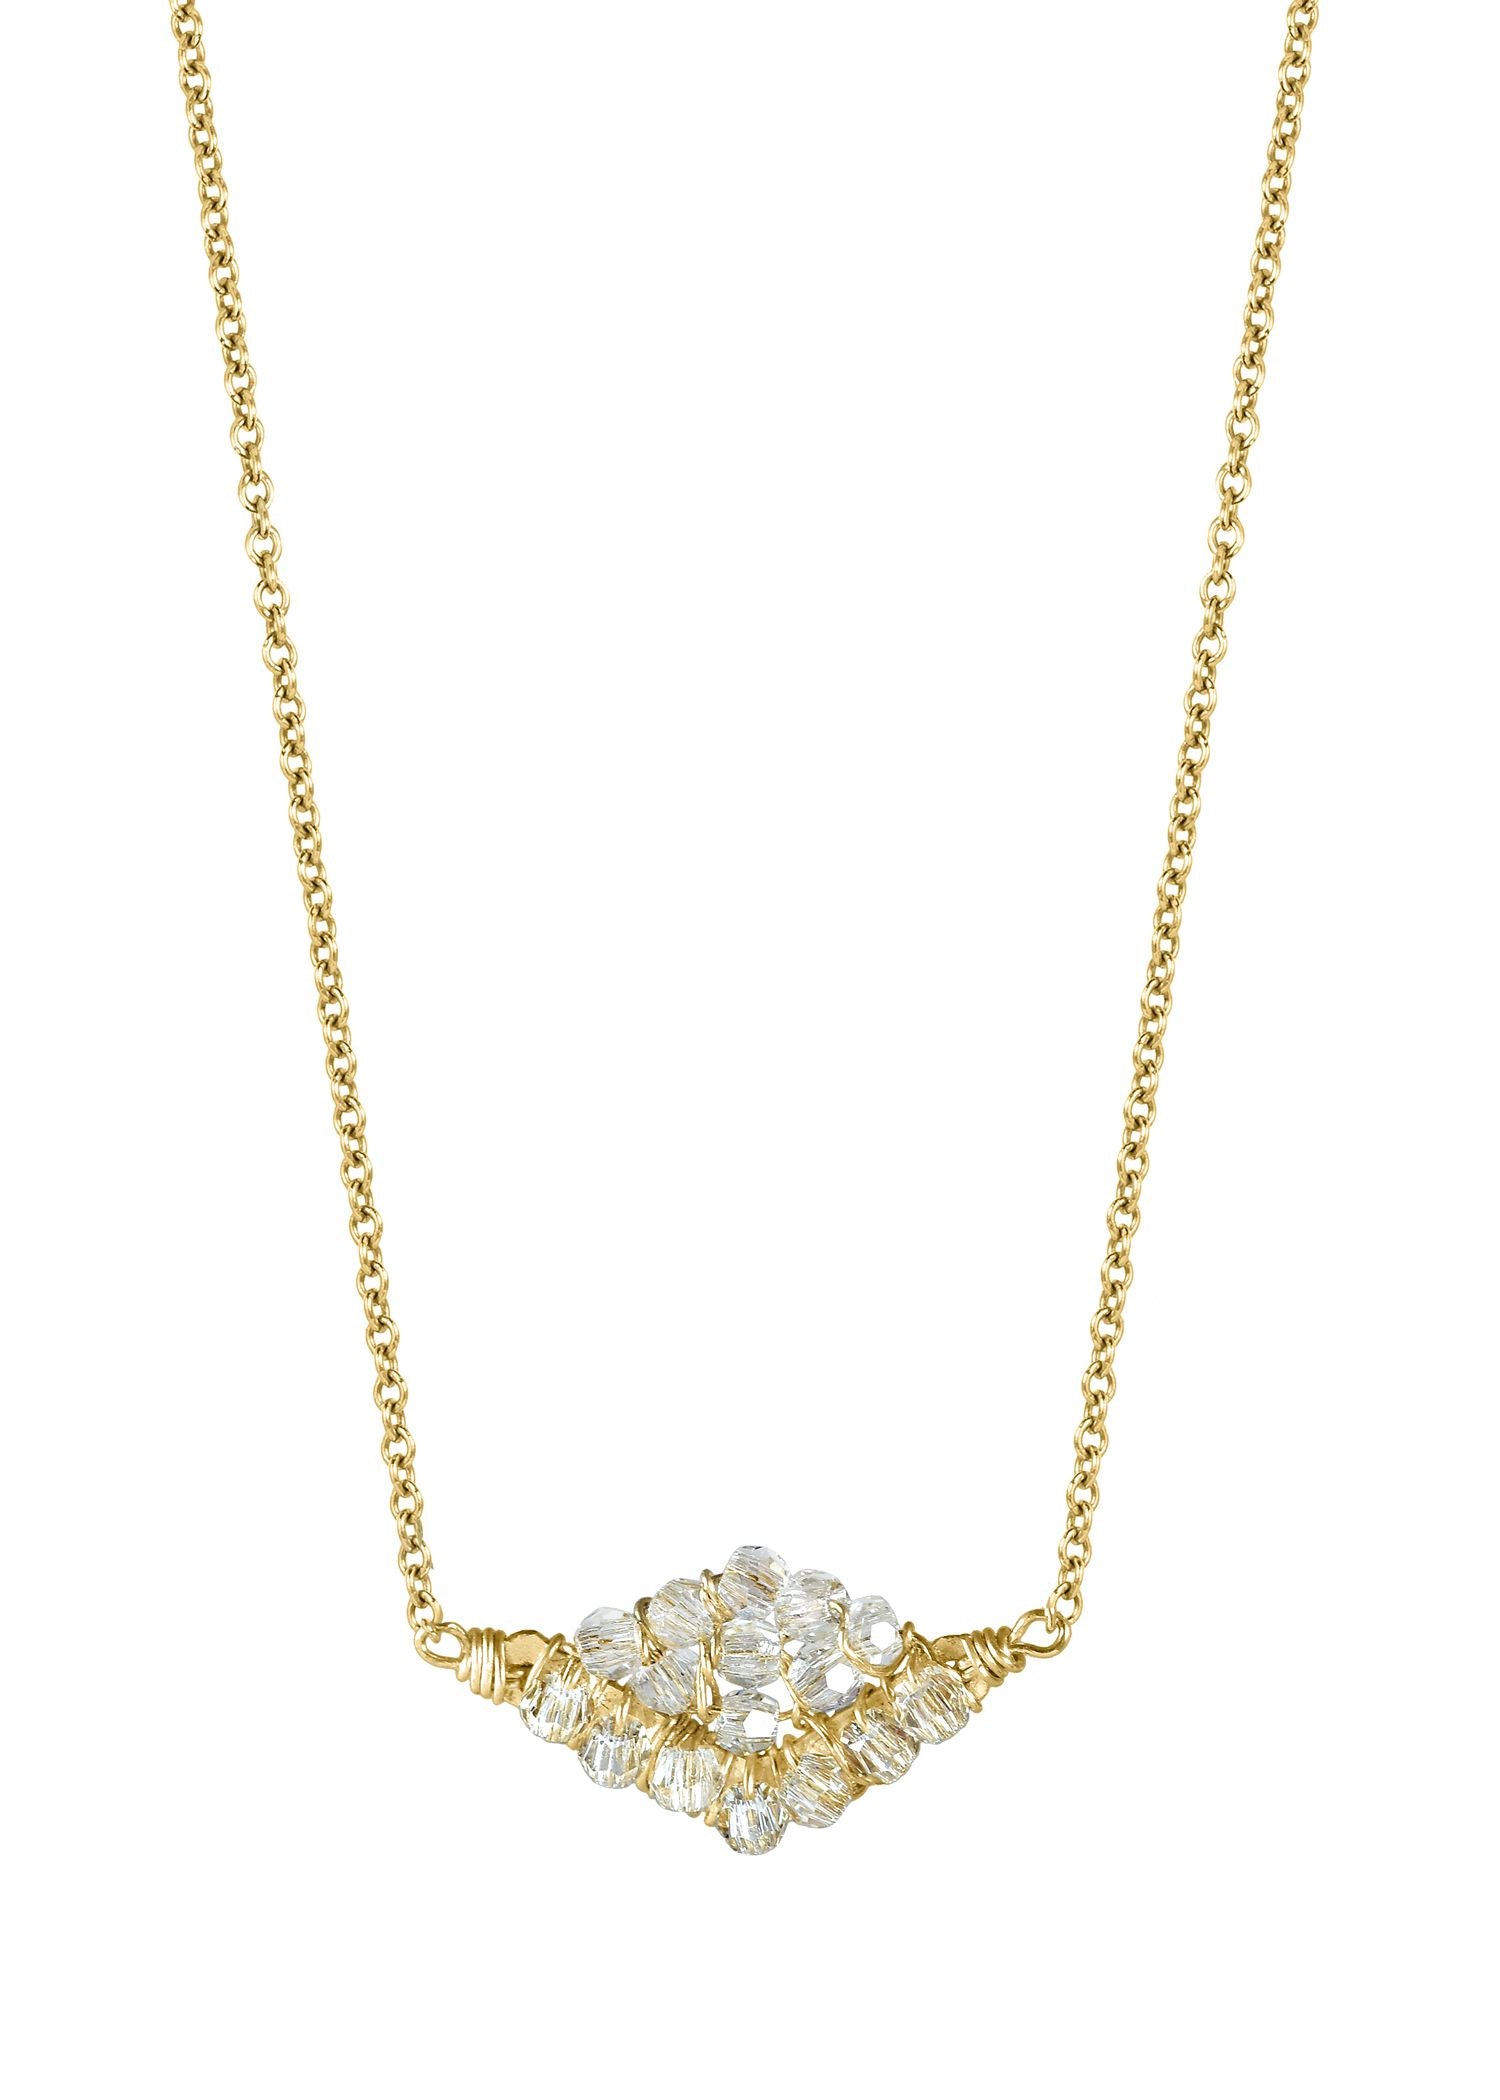 Crystal 14k gold fill Necklace measures 17” in length Pendant measures 5/16” in length and 1/2” in width Handmade in our Los Angeles studio